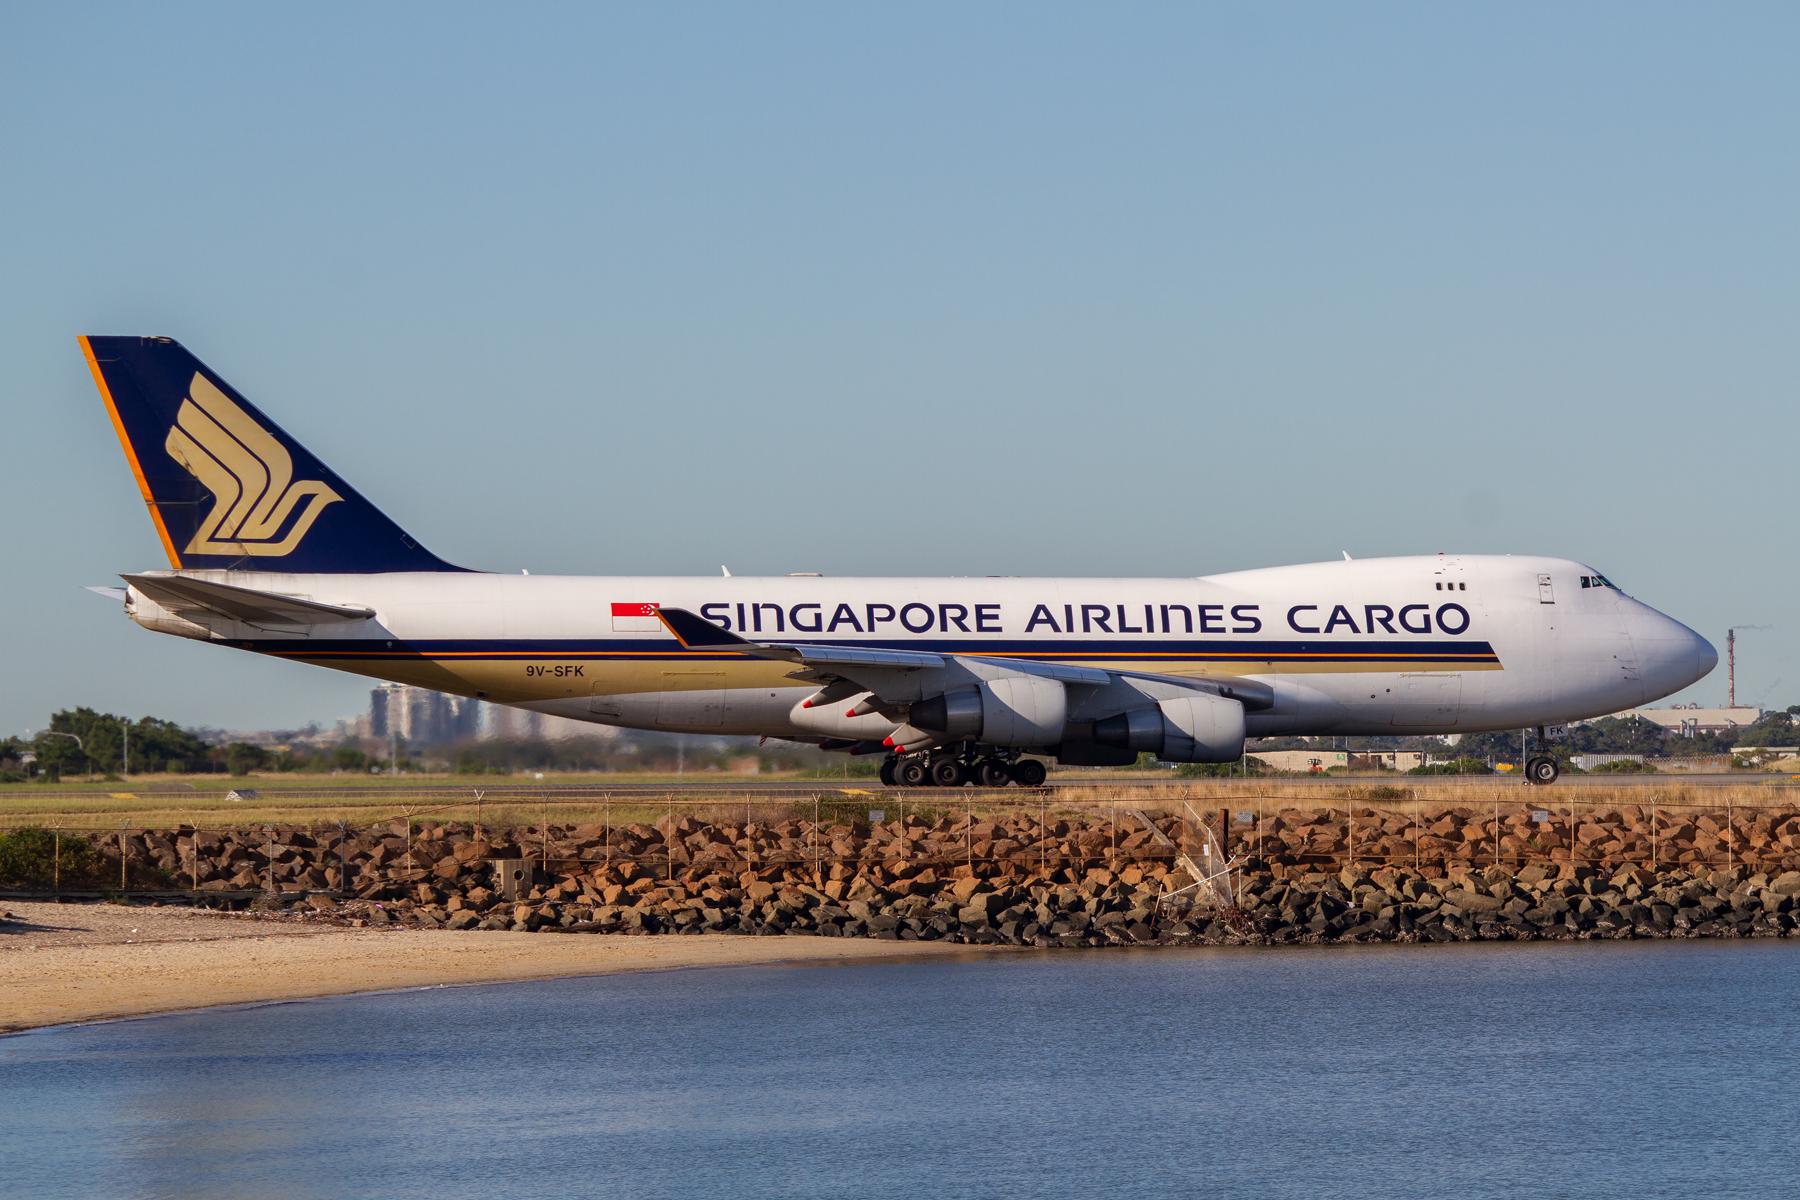 Singapore Airlines Boeing 747-400F 9V-SFK at Kingsford Smith